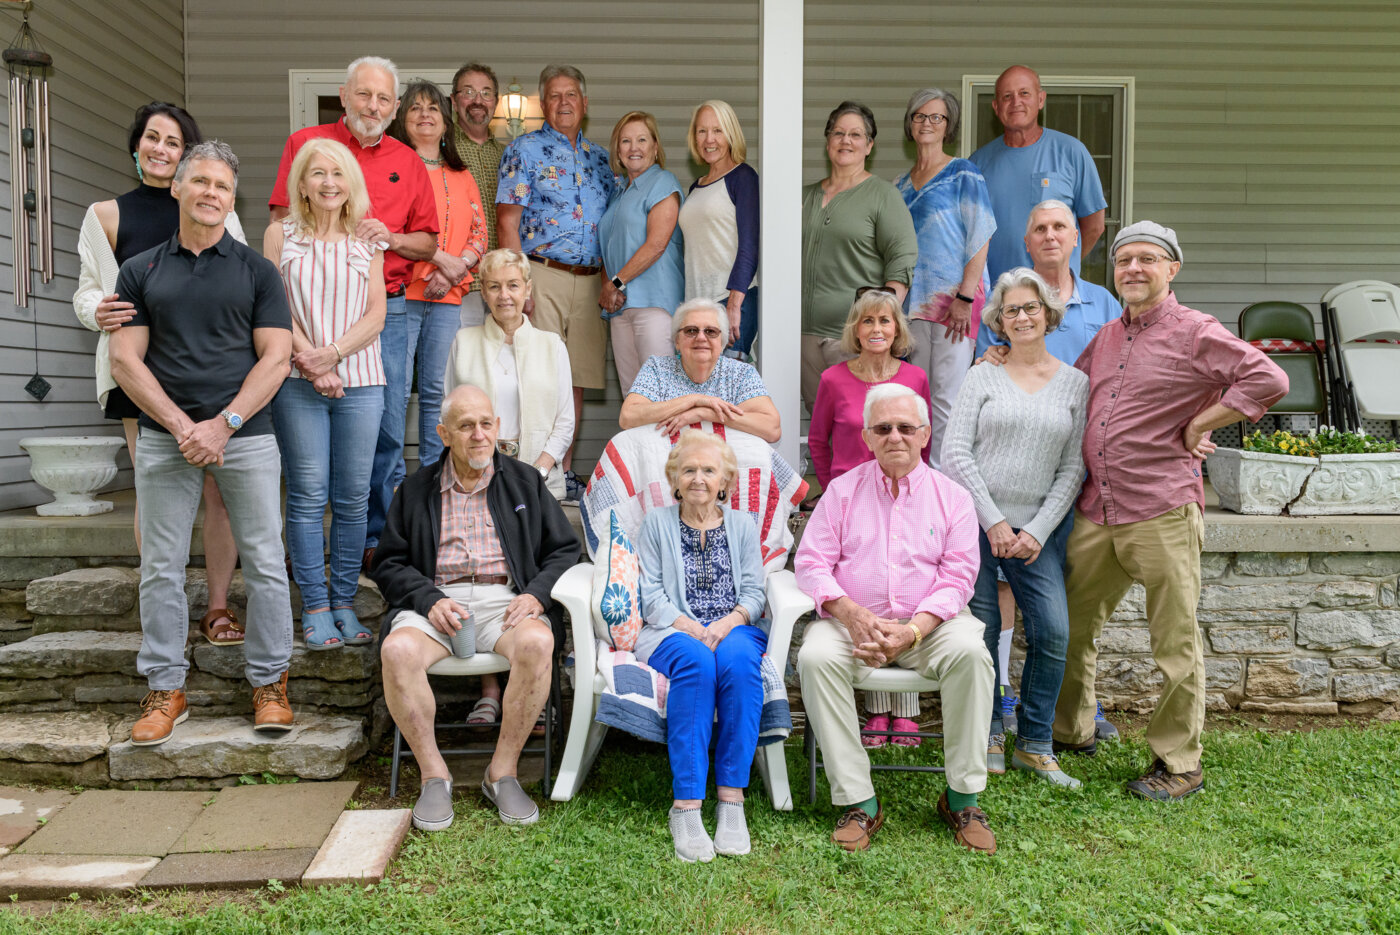 The Bohannon family gathers for a reunion and group photo Sunday, May 22, 2022 at Scott and Kay Quire's farm outside Frankfort, Ky.